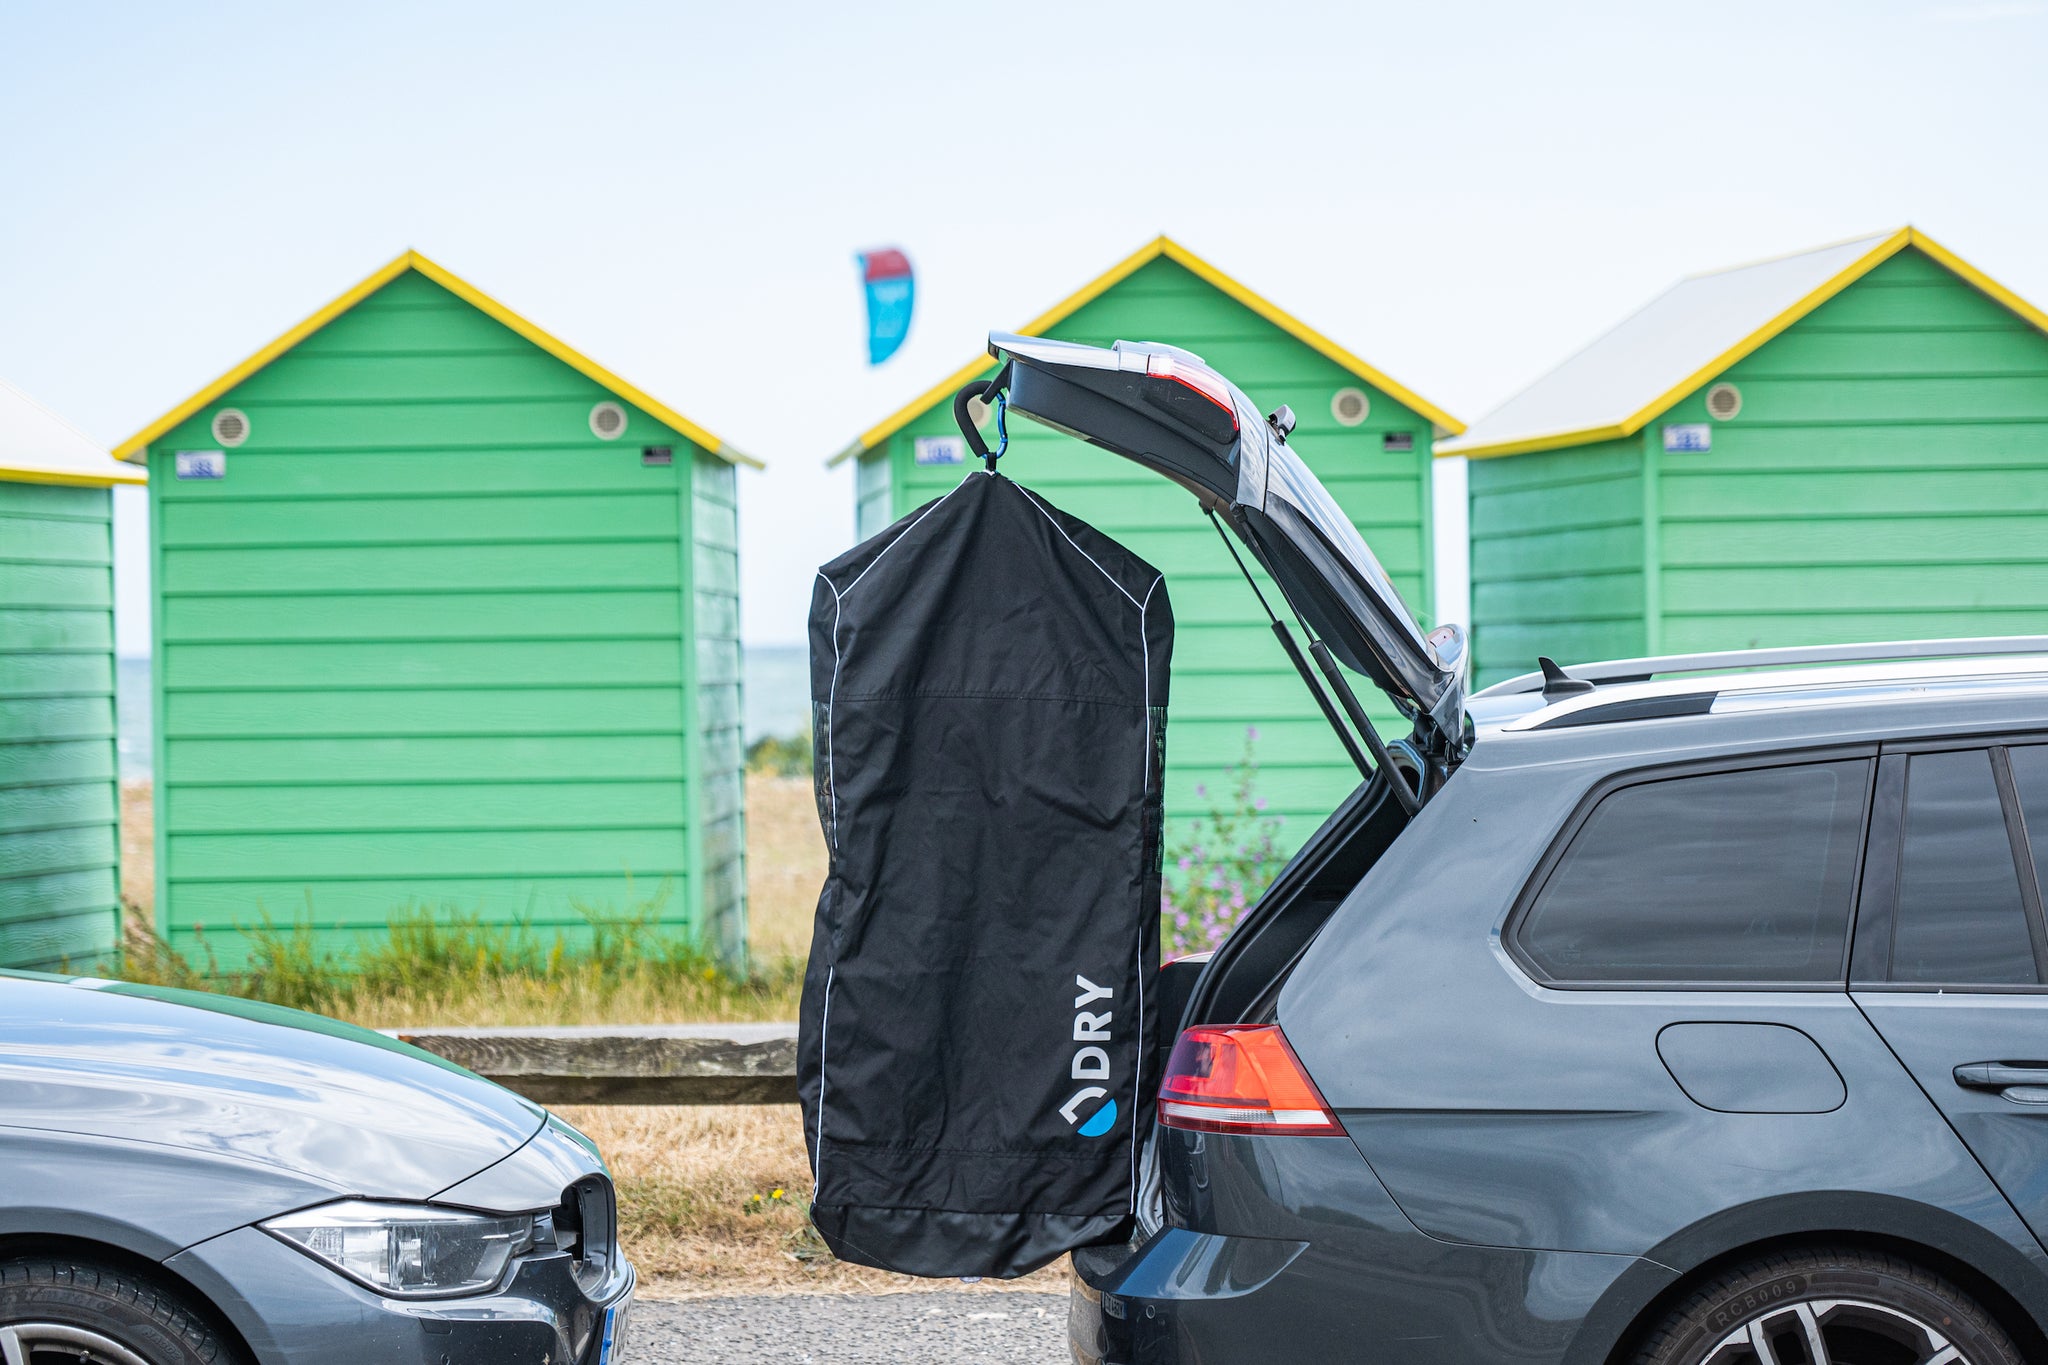 The Dry Bag Pro with Hanger - Black + Grey Wetsuit Bag, full fabric wetsuit, drysuit, outdoor gear bag that protects, stores and dries your wet gear. RRP £60.00